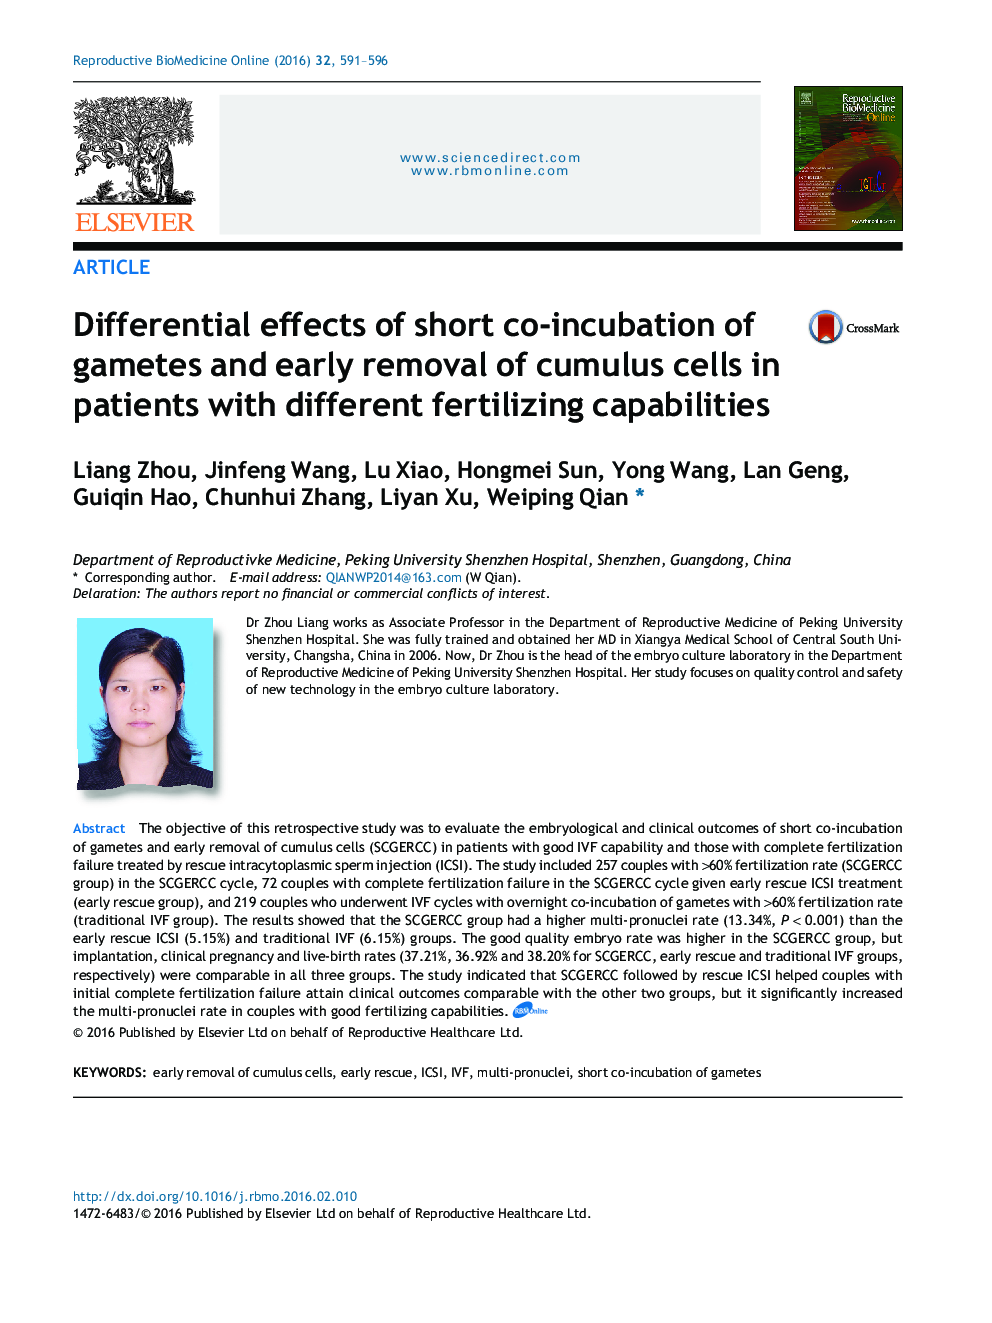 Differential effects of short co-incubation of gametes and early removal of cumulus cells in patients with different fertilizing capabilities